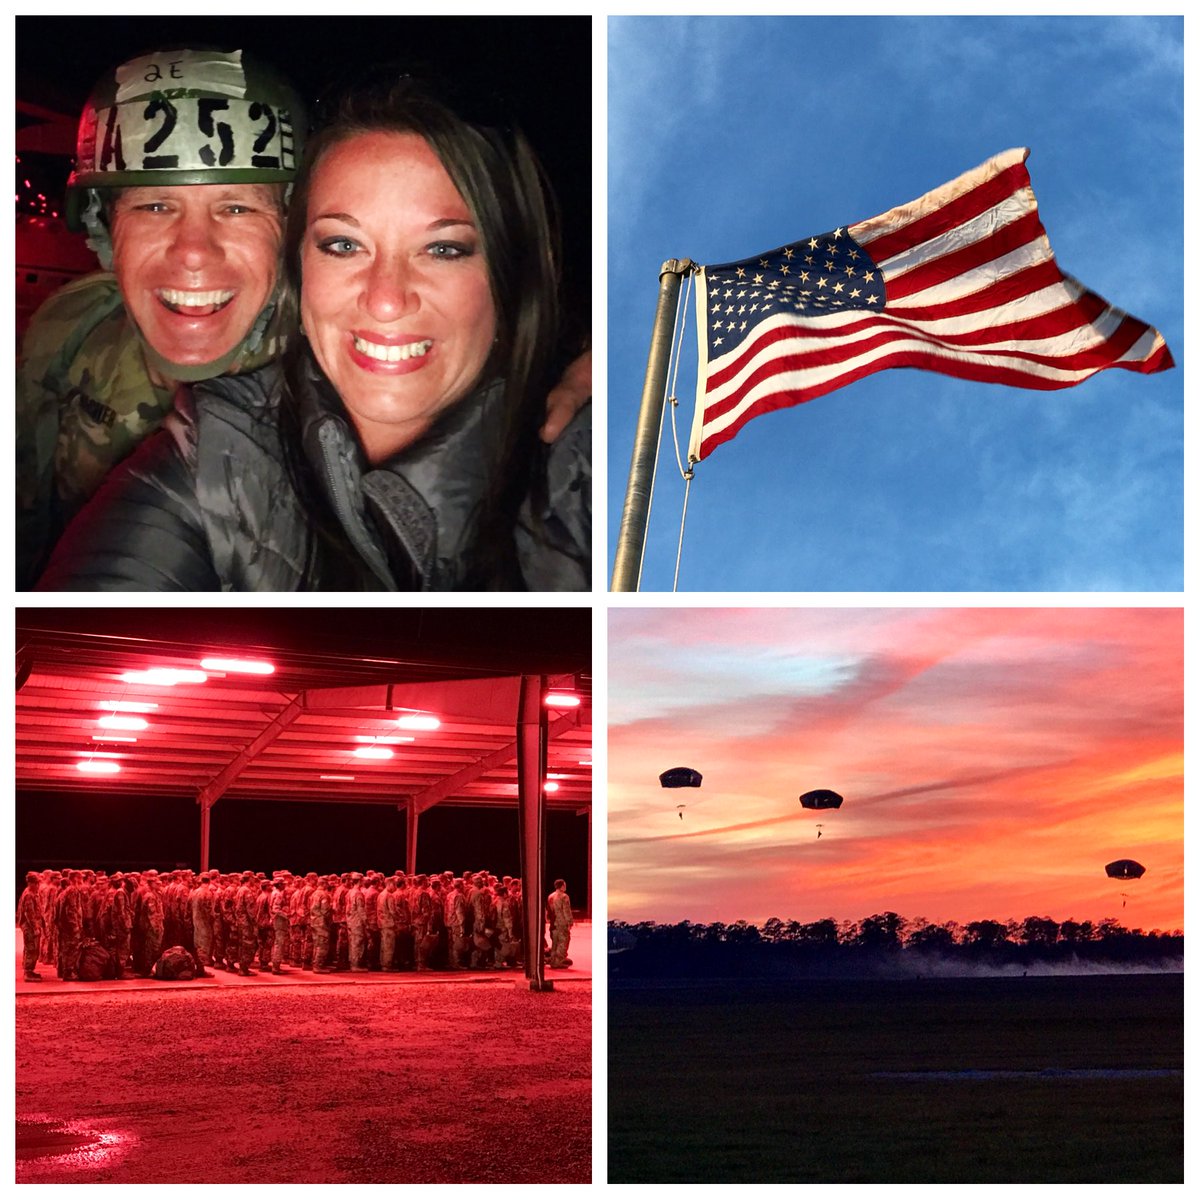 Chaplain's night jump was a success. Thank you for praying. 💛 3 more to go! #Army #AirborneAdventures